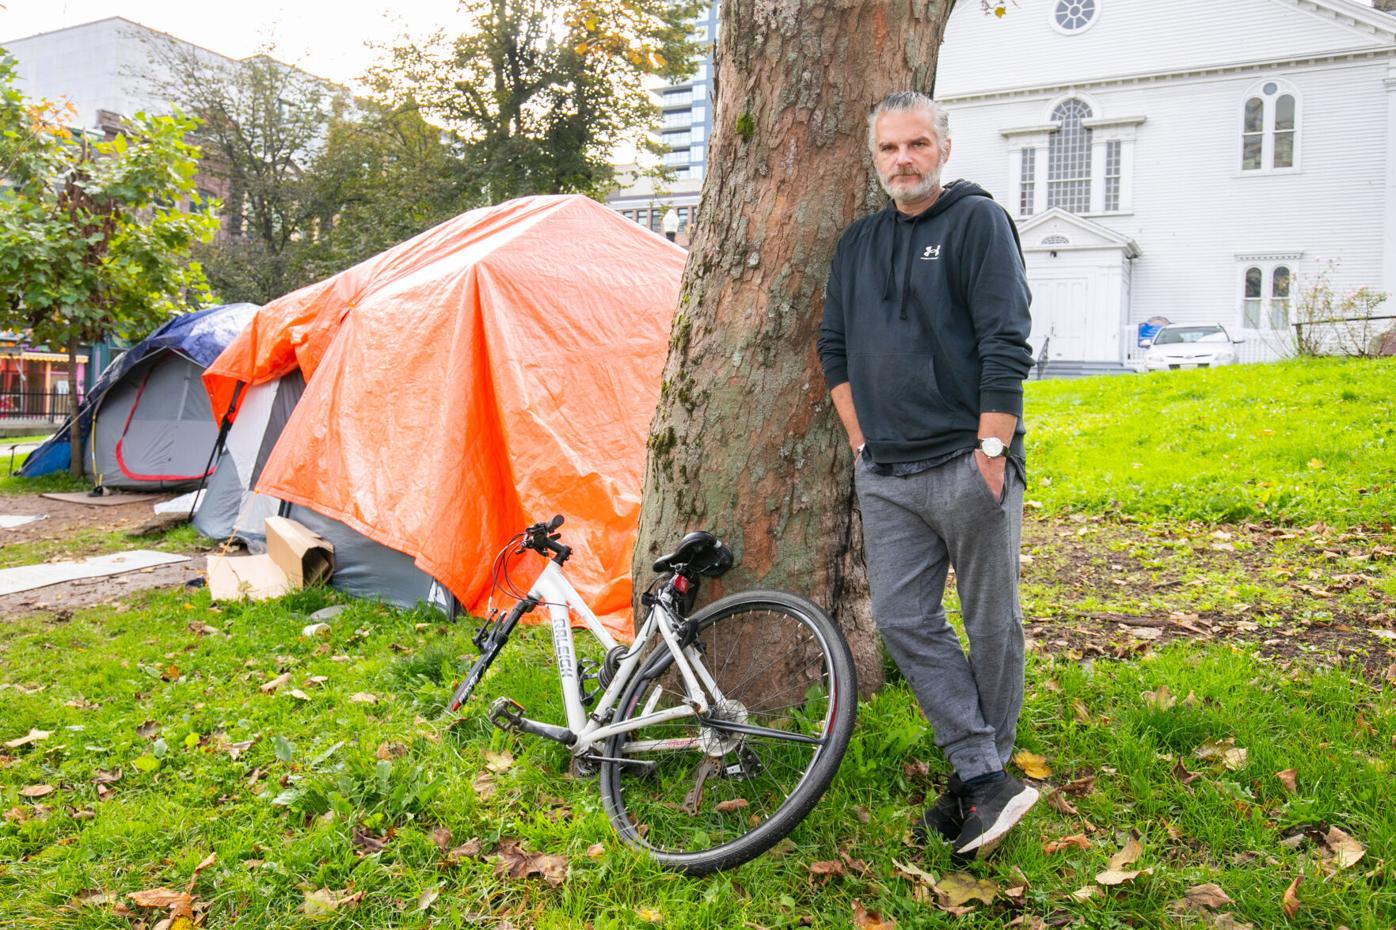 I have no fixed address': A look at encampments for homeless across Canada, Politics